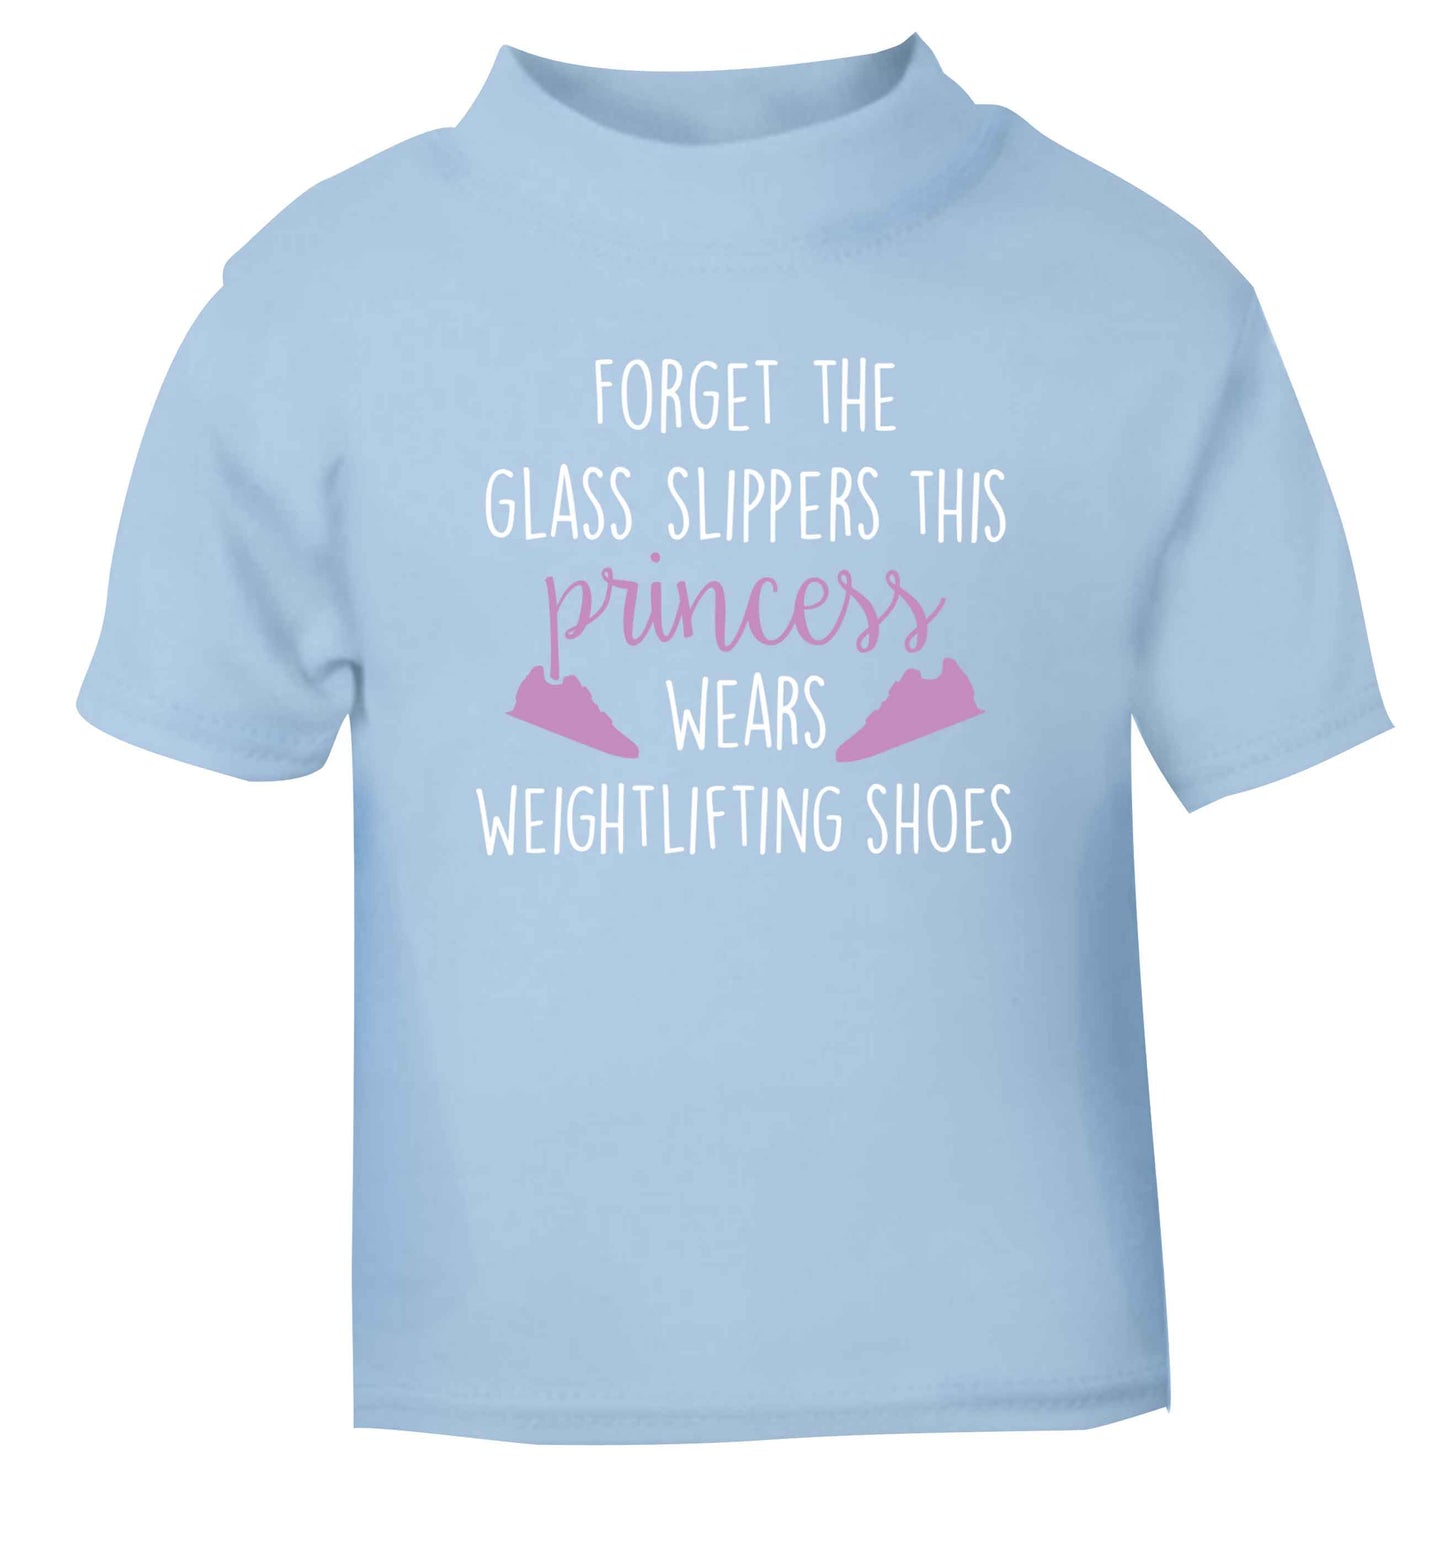 Forget the glass slippers this princess wears weightlifting shoes light blue Baby Toddler Tshirt 2 Years